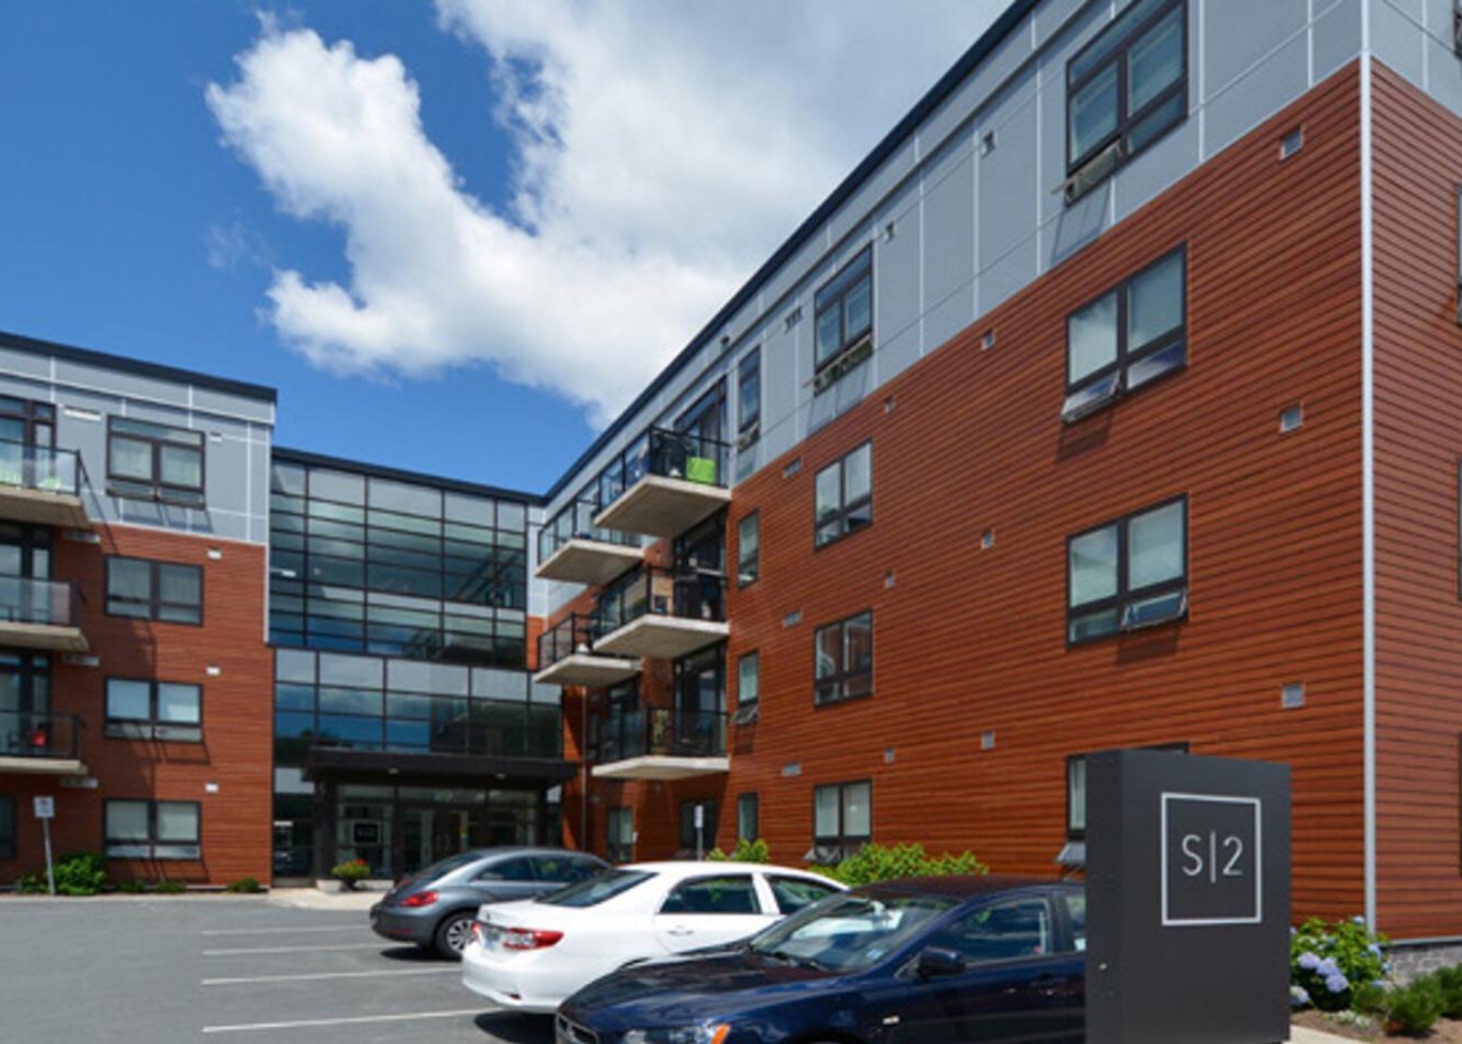 Image of The S|2 building in Halifax, NS